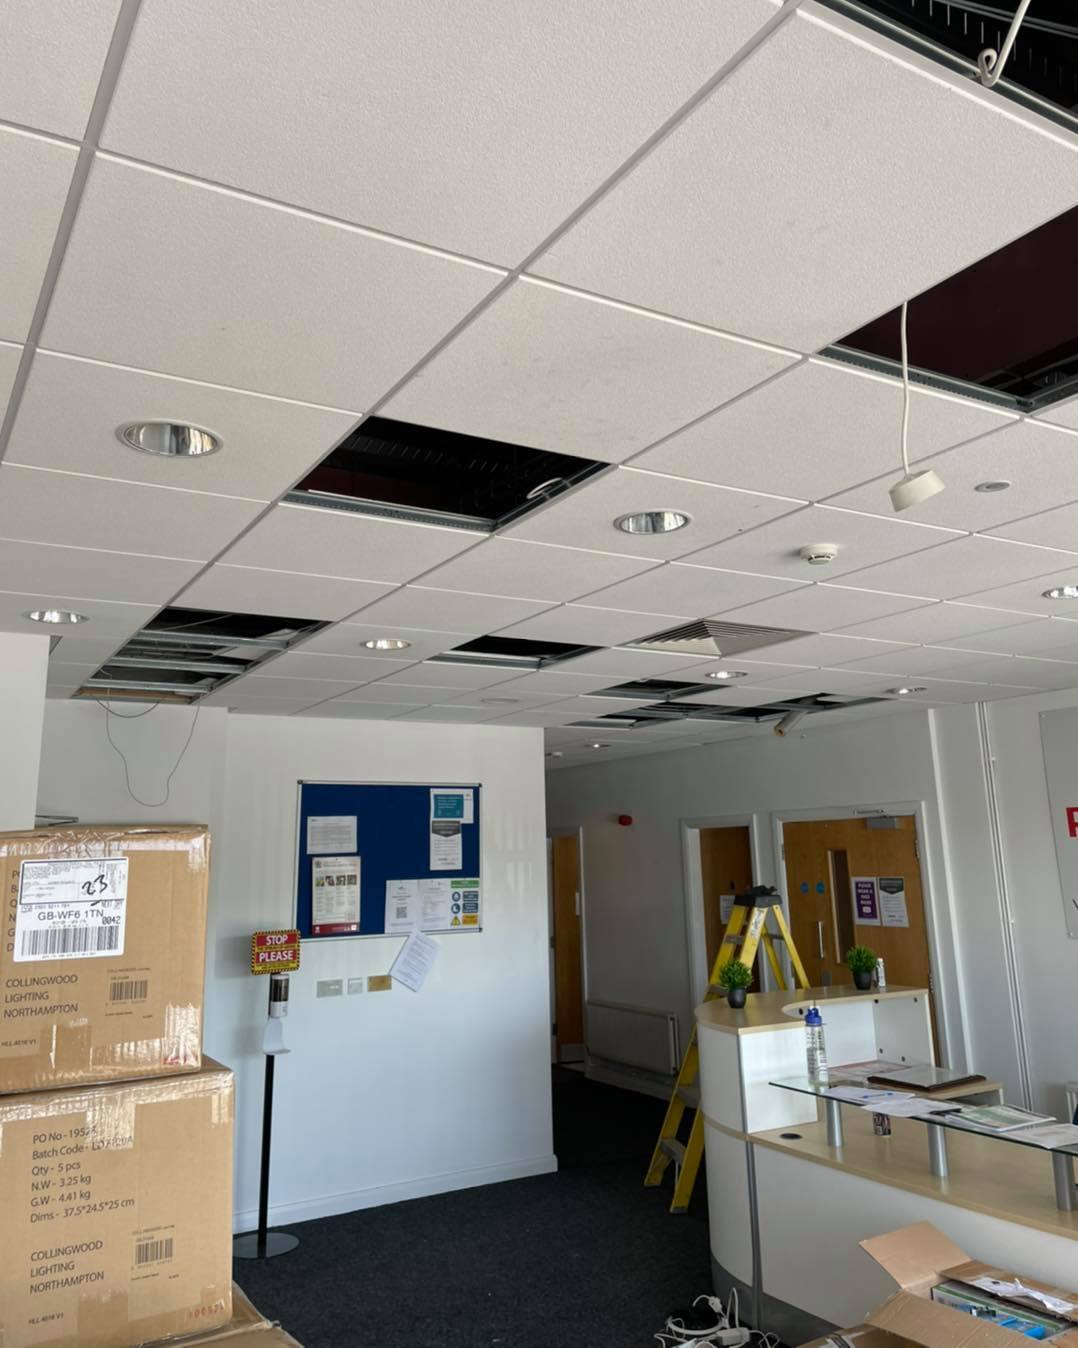 Office lights replaced with LEDs and sensors